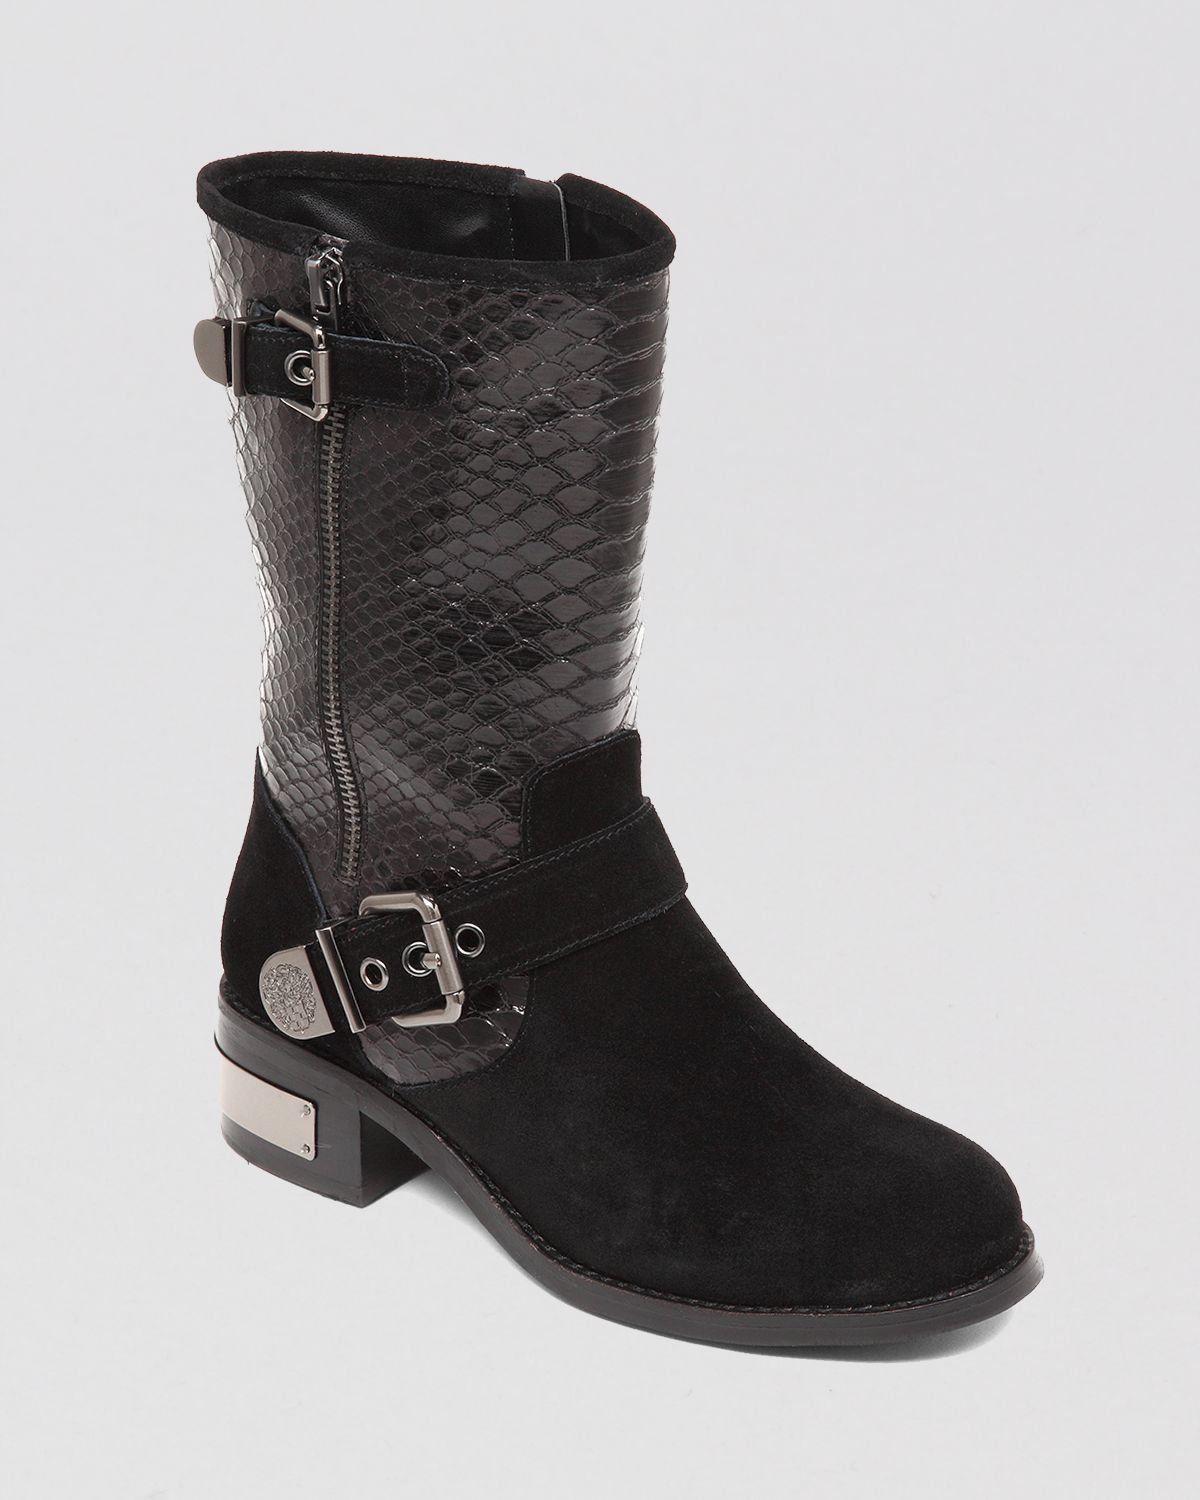 Lyst Vince Camuto Moto Boots Witty in Black